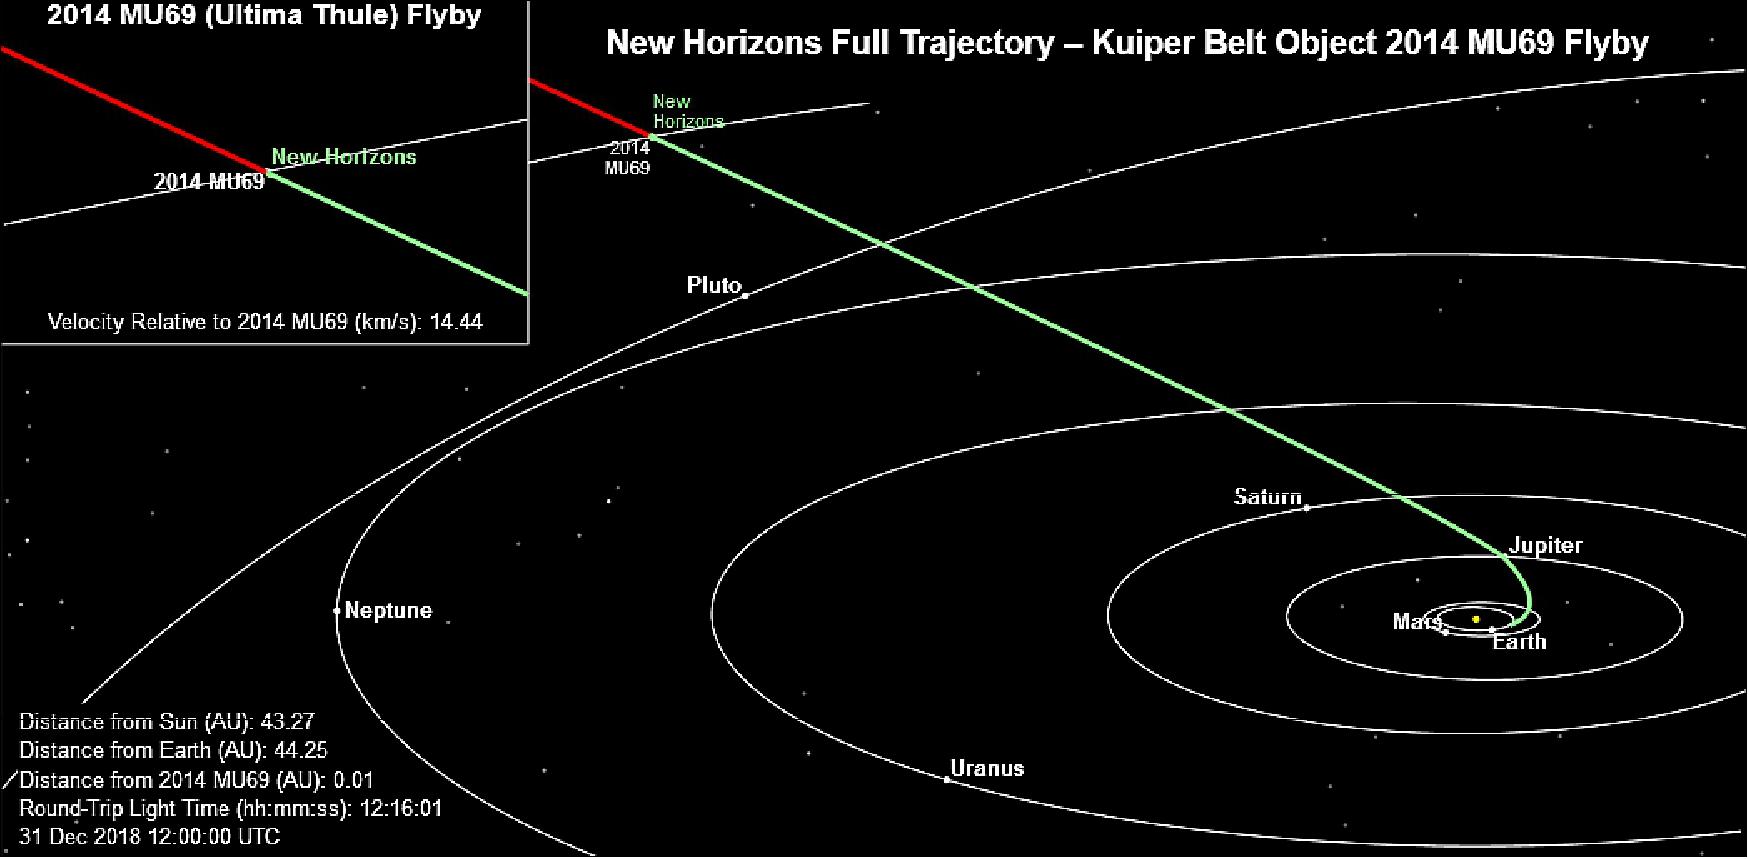 Figure 46: Full trajectory: side view: This image shows New Horizons' current position along its full planned trajectory. The green segment of the line shows where New Horizons has traveled since launch; the red indicates the spacecraft's future path. Positions of stars with magnitude 12 or brighter are shown from this perspective, which is slightly above the orbital plane of the planets (image credit: JHU/APL, NASA, SwRI) 44)